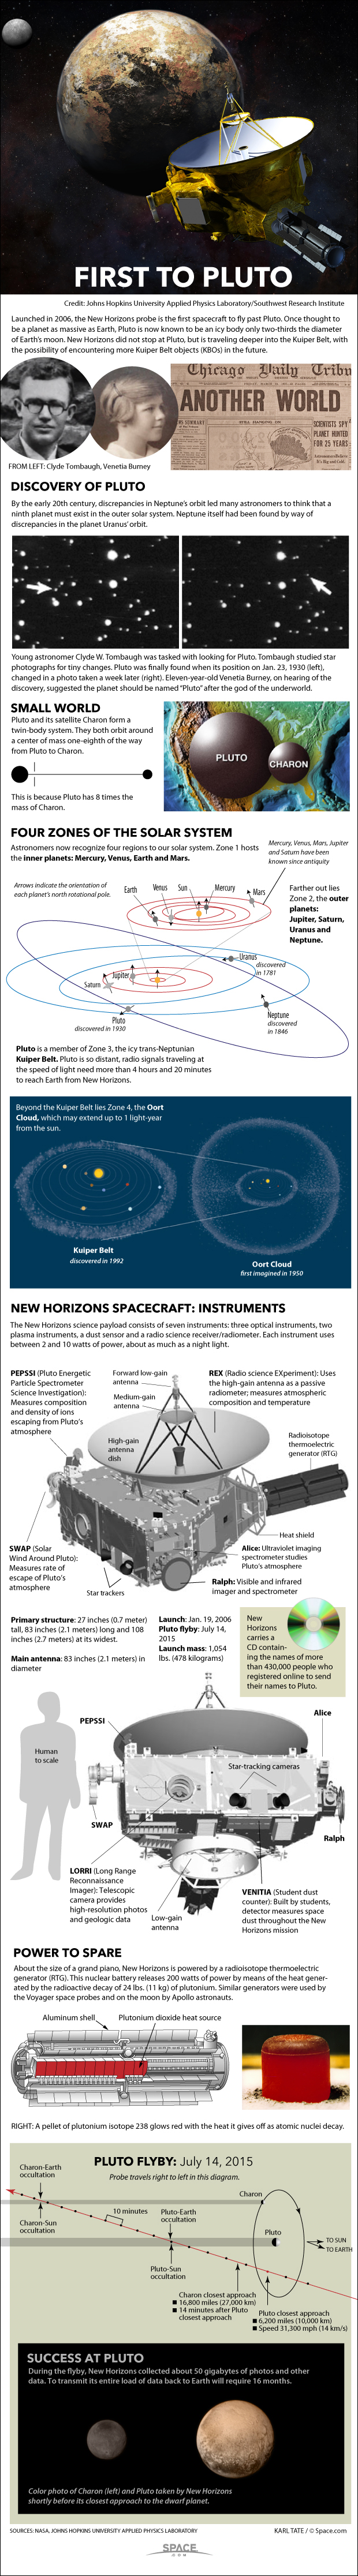 Diagrams show New Horizons encounter with Pluto